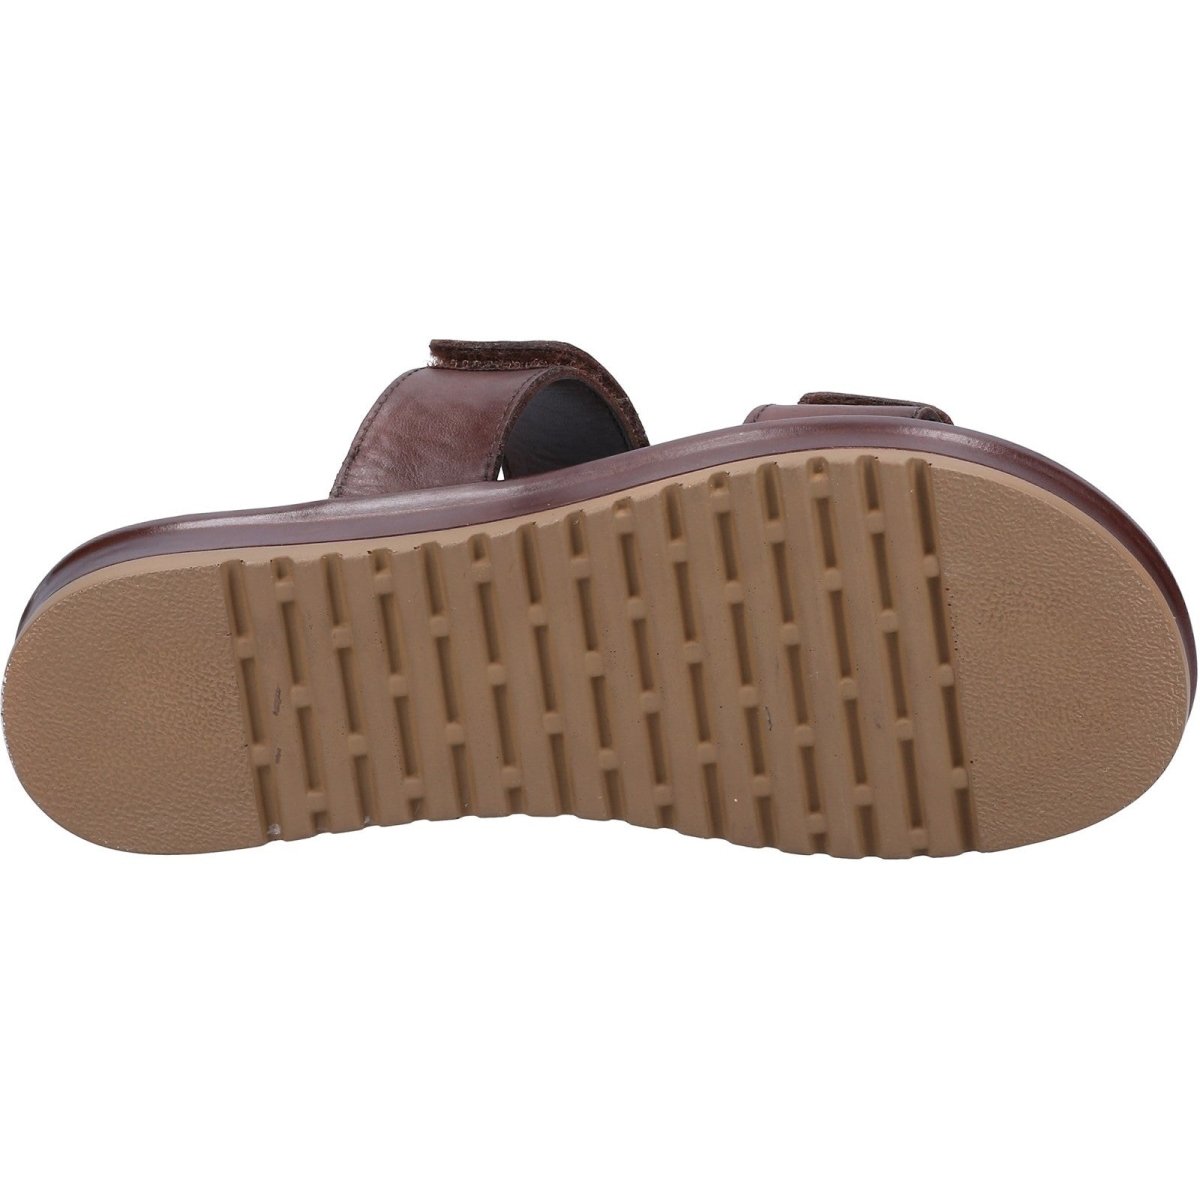 Cotswold Northleach Ladies Lightweight Summer Mule Shoes - Shoe Store Direct